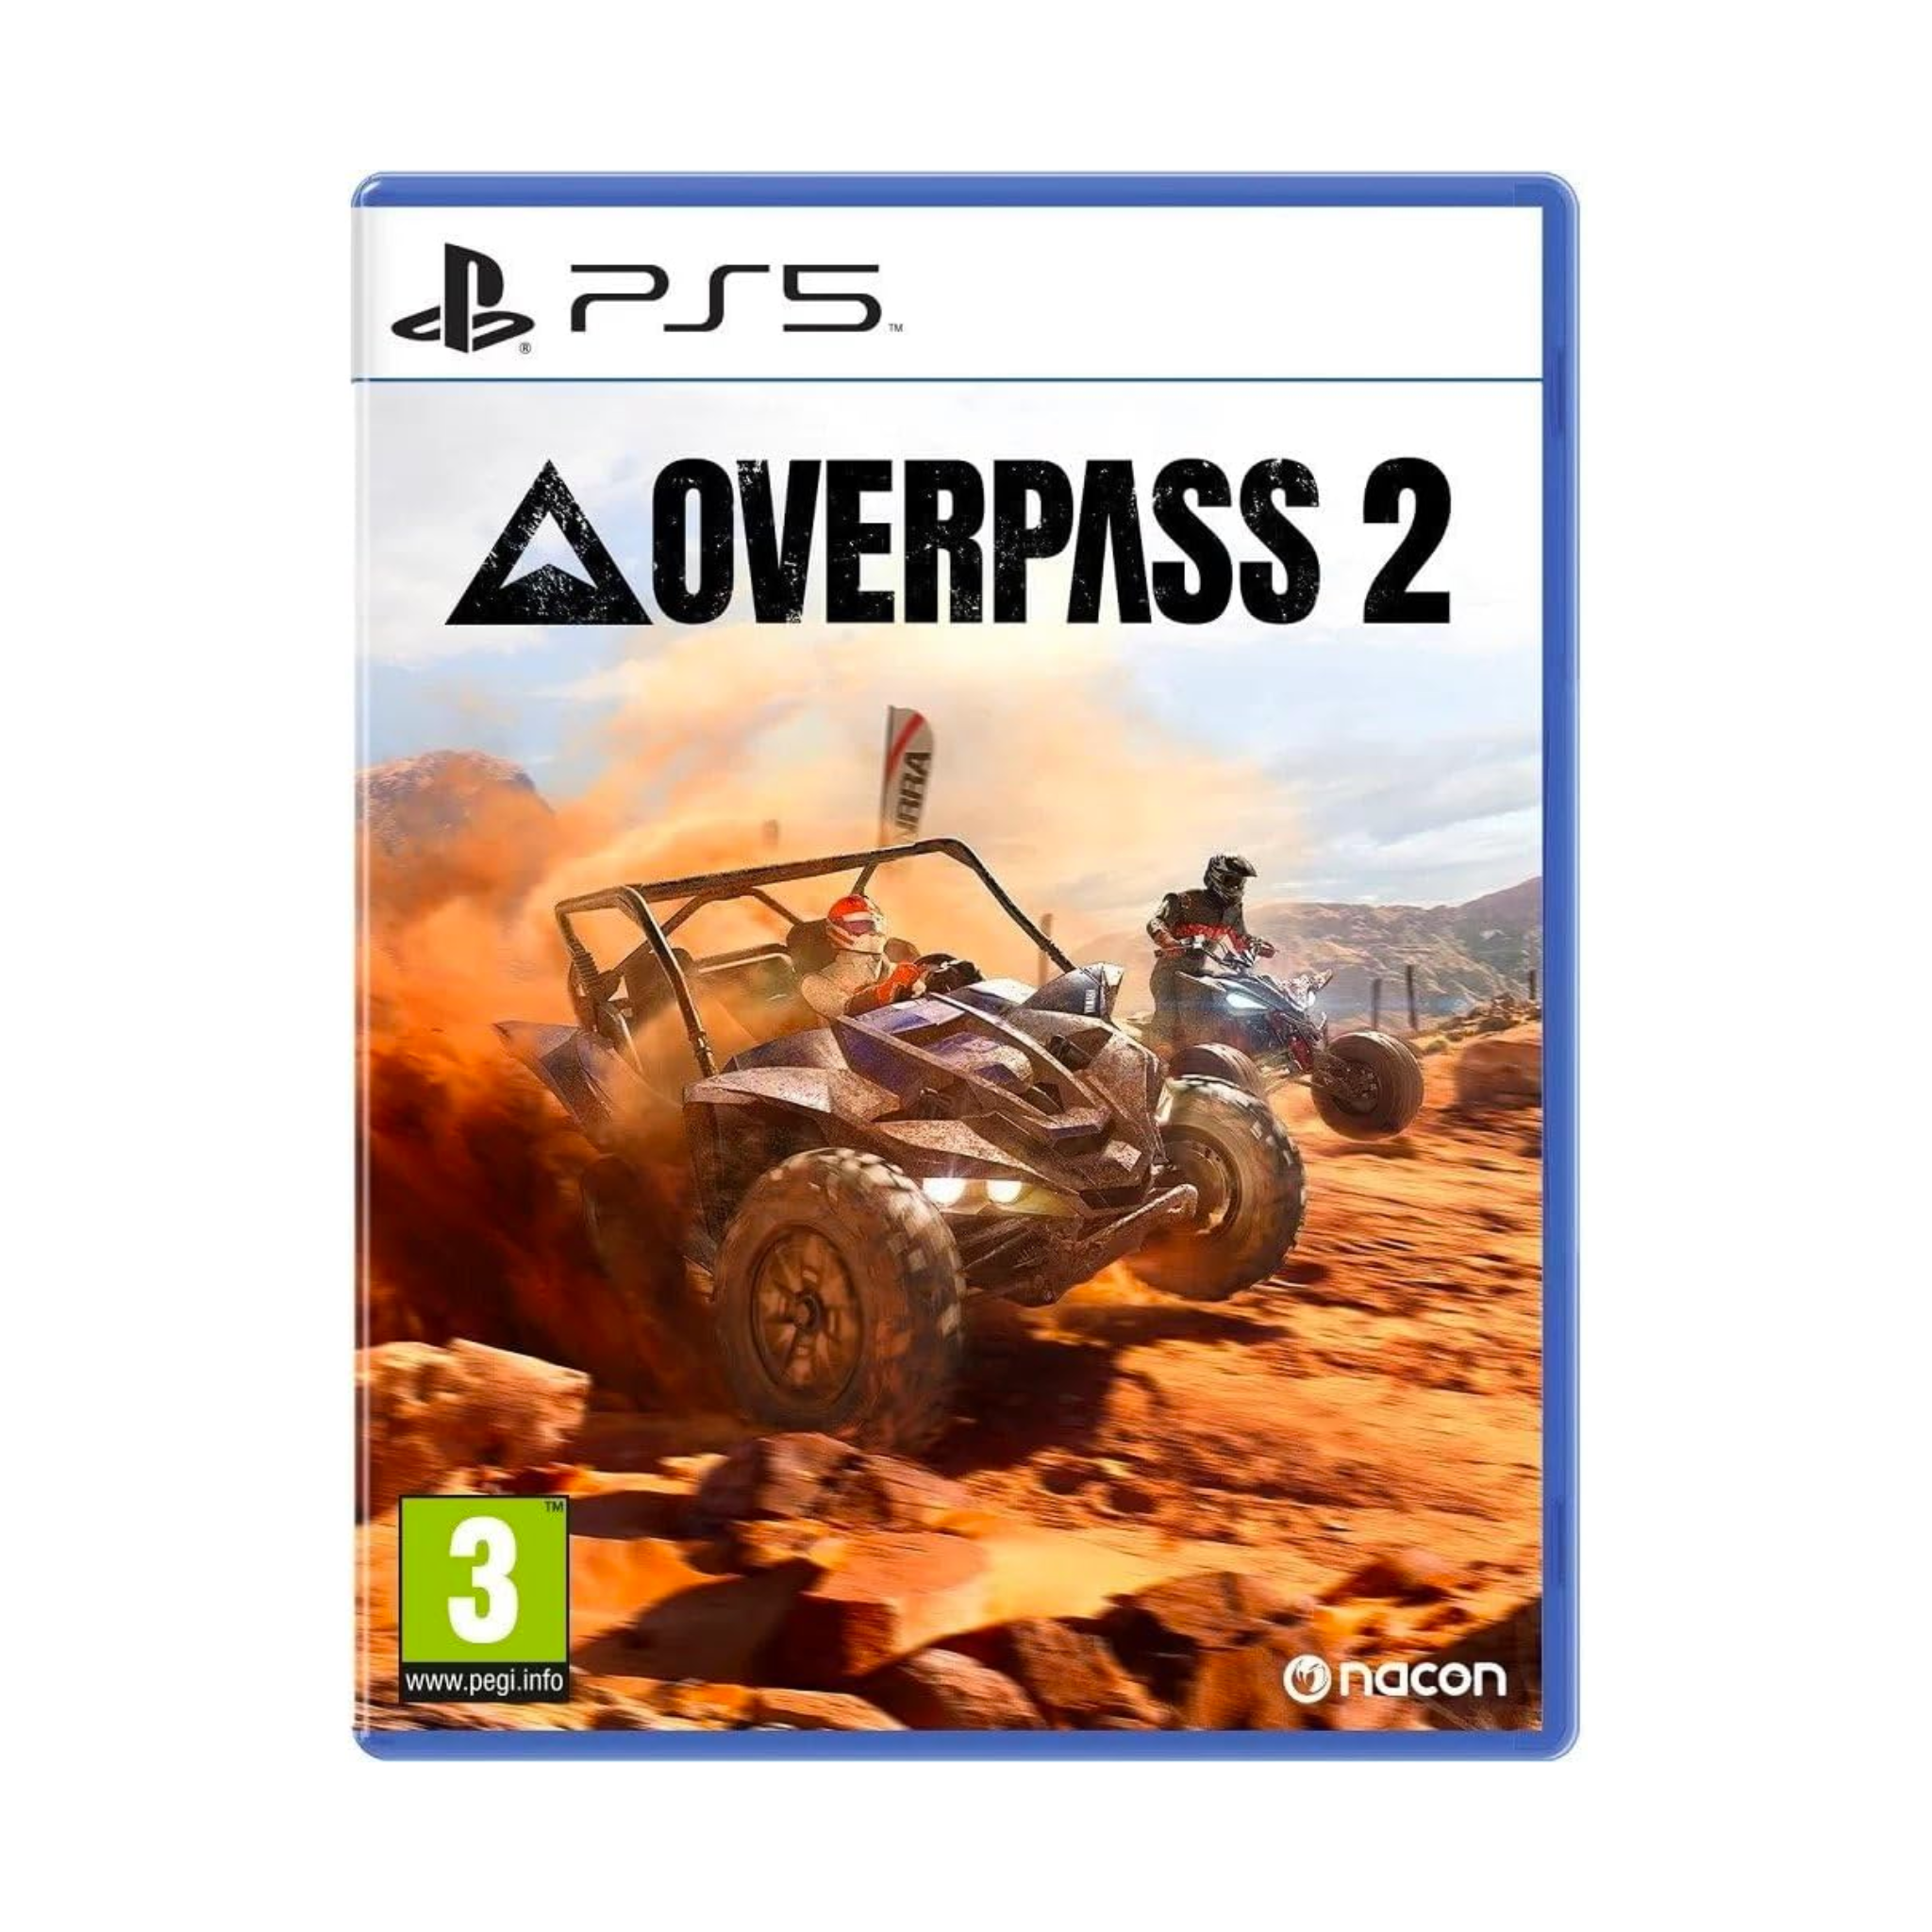 Image of Overpass 2 Video Game for Playstation 5